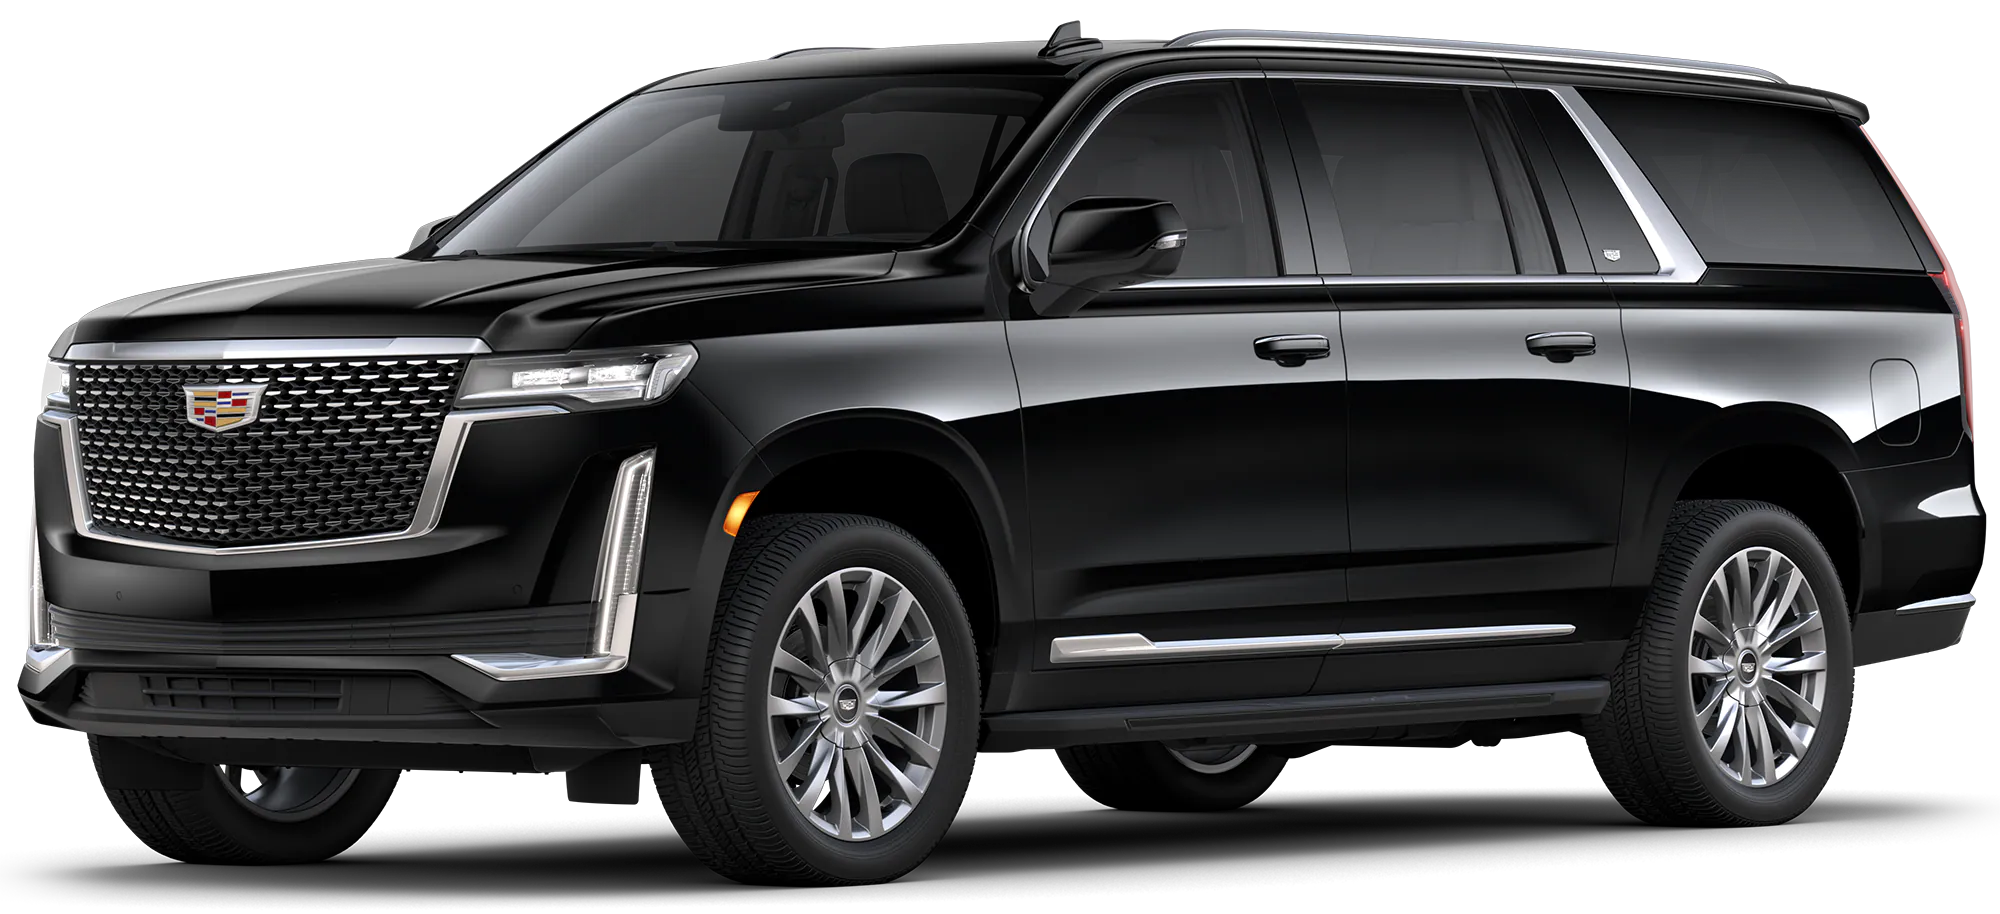 intro by diamond lux limo about us page which provide luxurious black car and limo rental services near palm beach, palm beach gardens, near hobe sound florida, near vero beach florida,